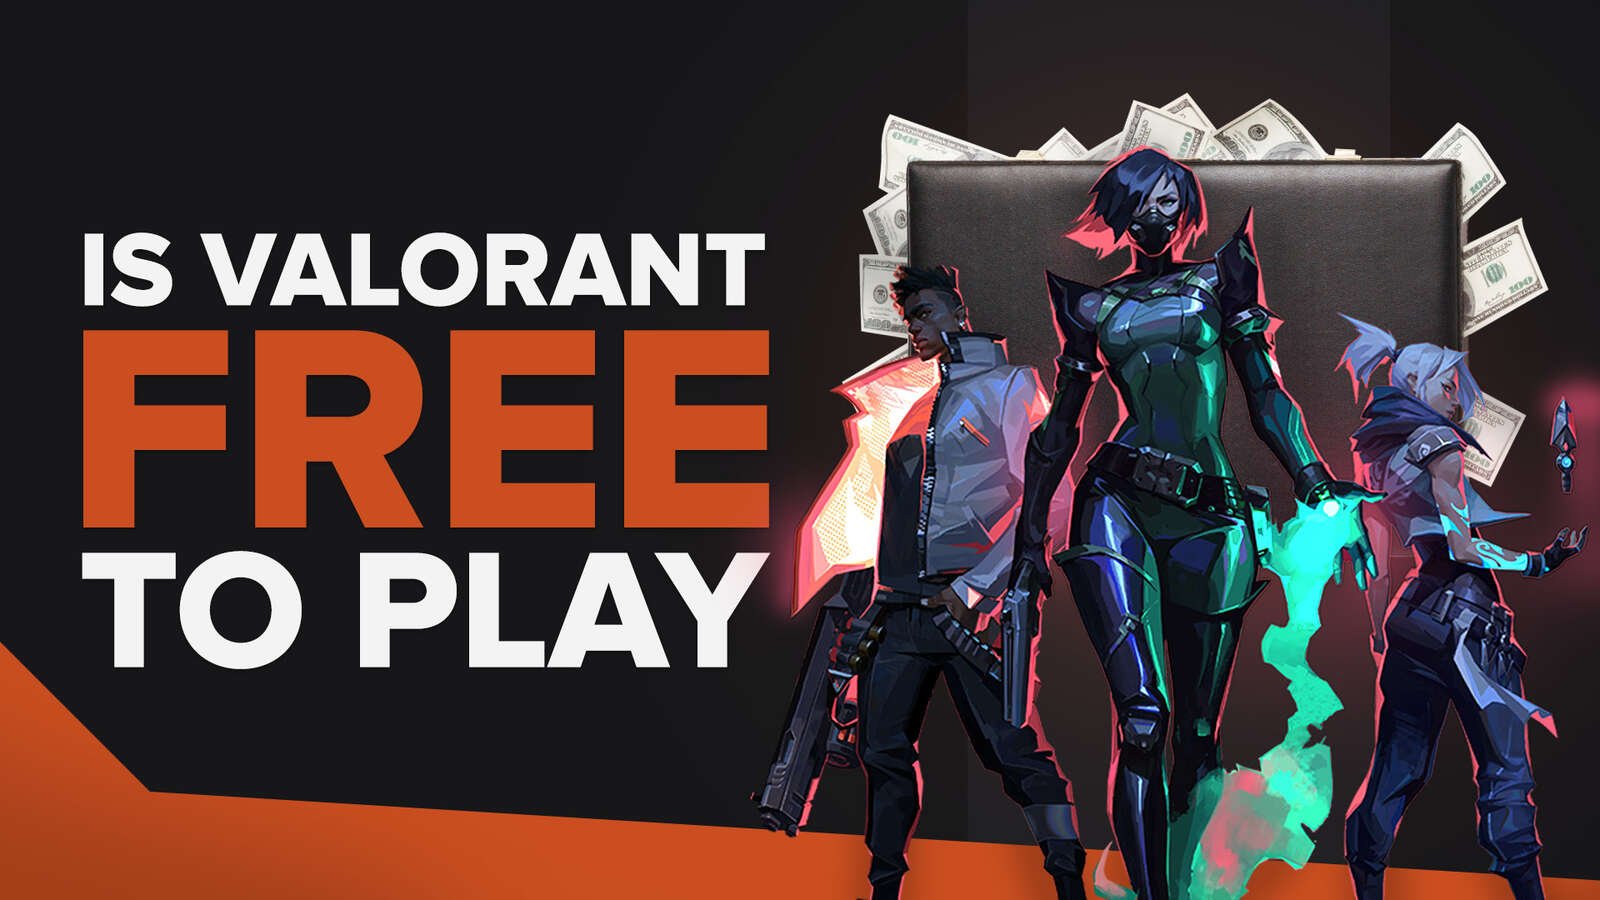 Is Valorant free to play?